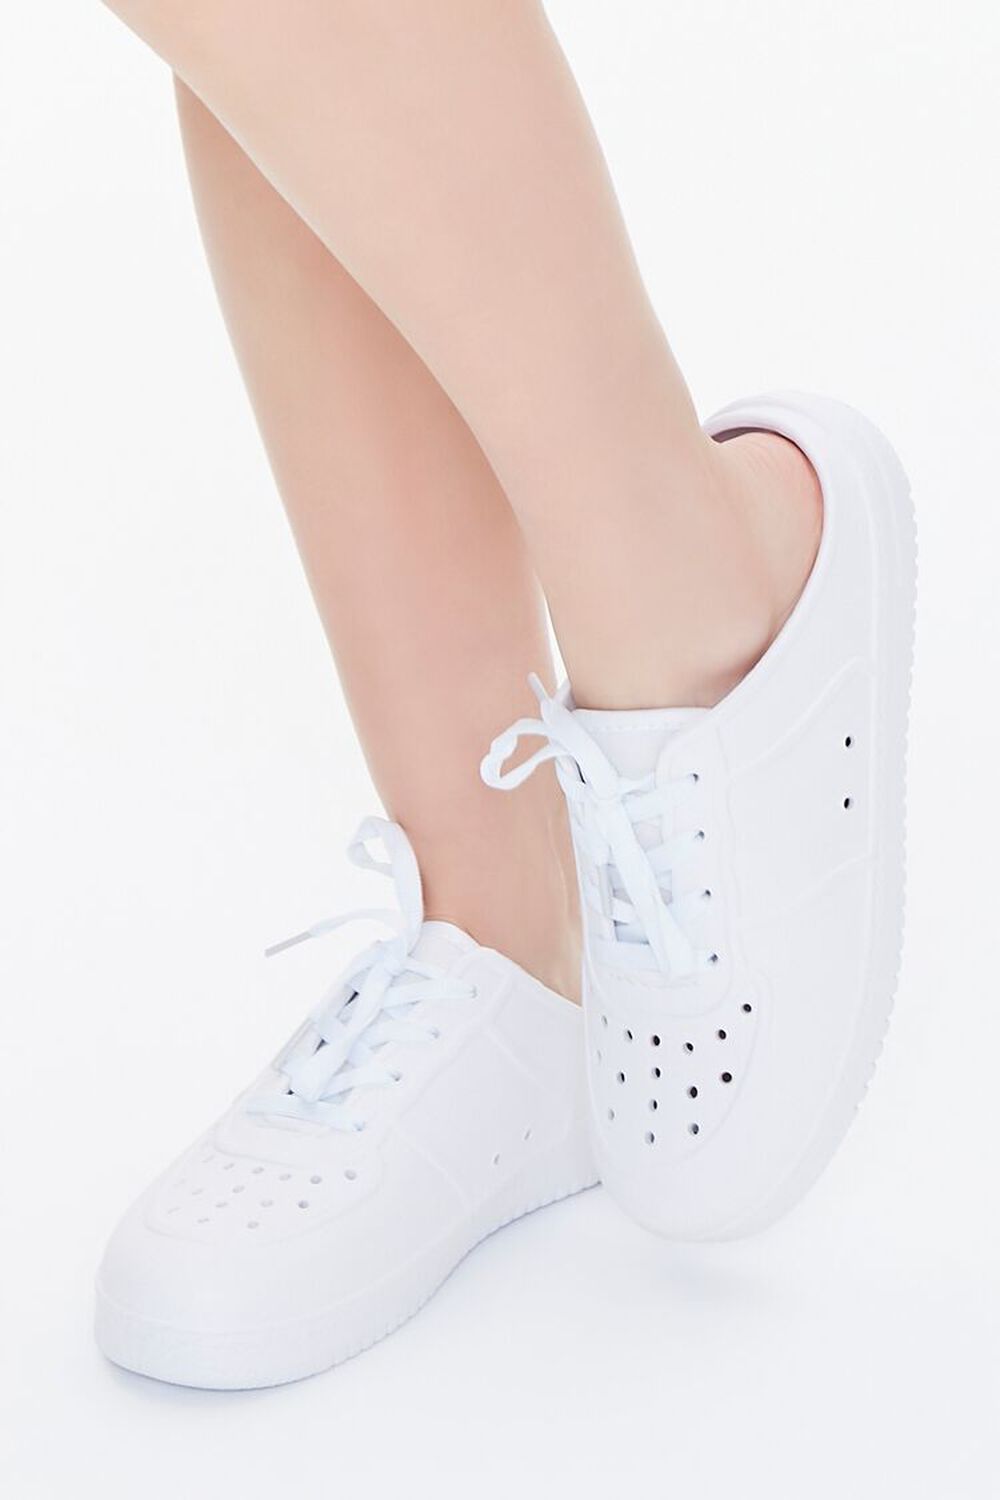 WHITE Perforated Low-Top Sneakers, image 1